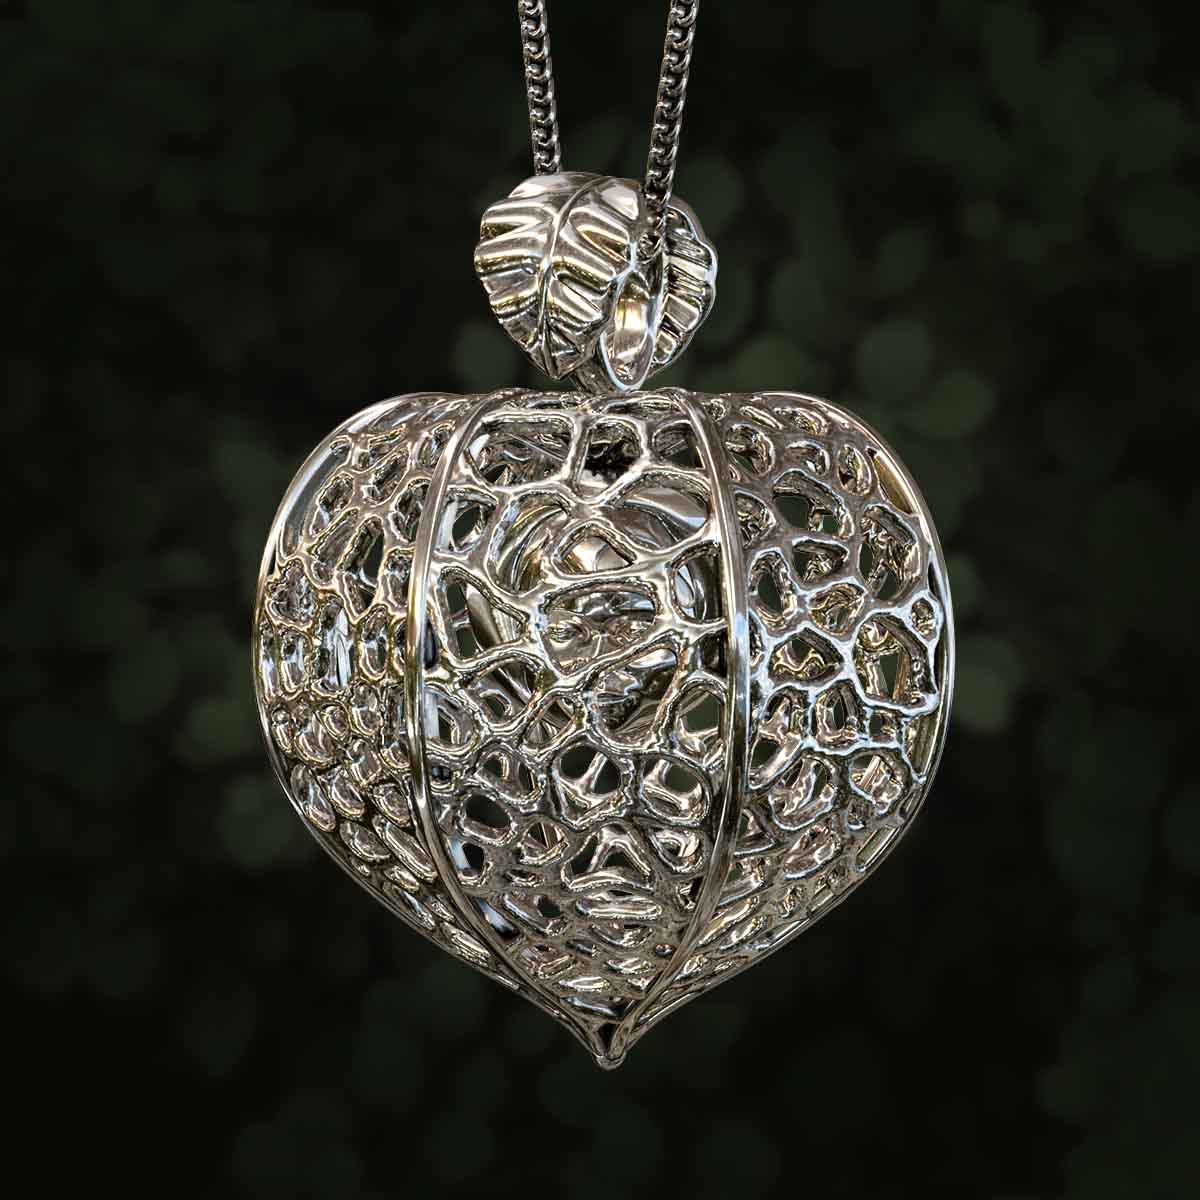 Main-Image-White-Gold-Rhodium-Finish-Chinese-Lantern-Plant-With-a-Cute-Face-Inside-the-Seed-Pendant-Jewelry-For-Necklace